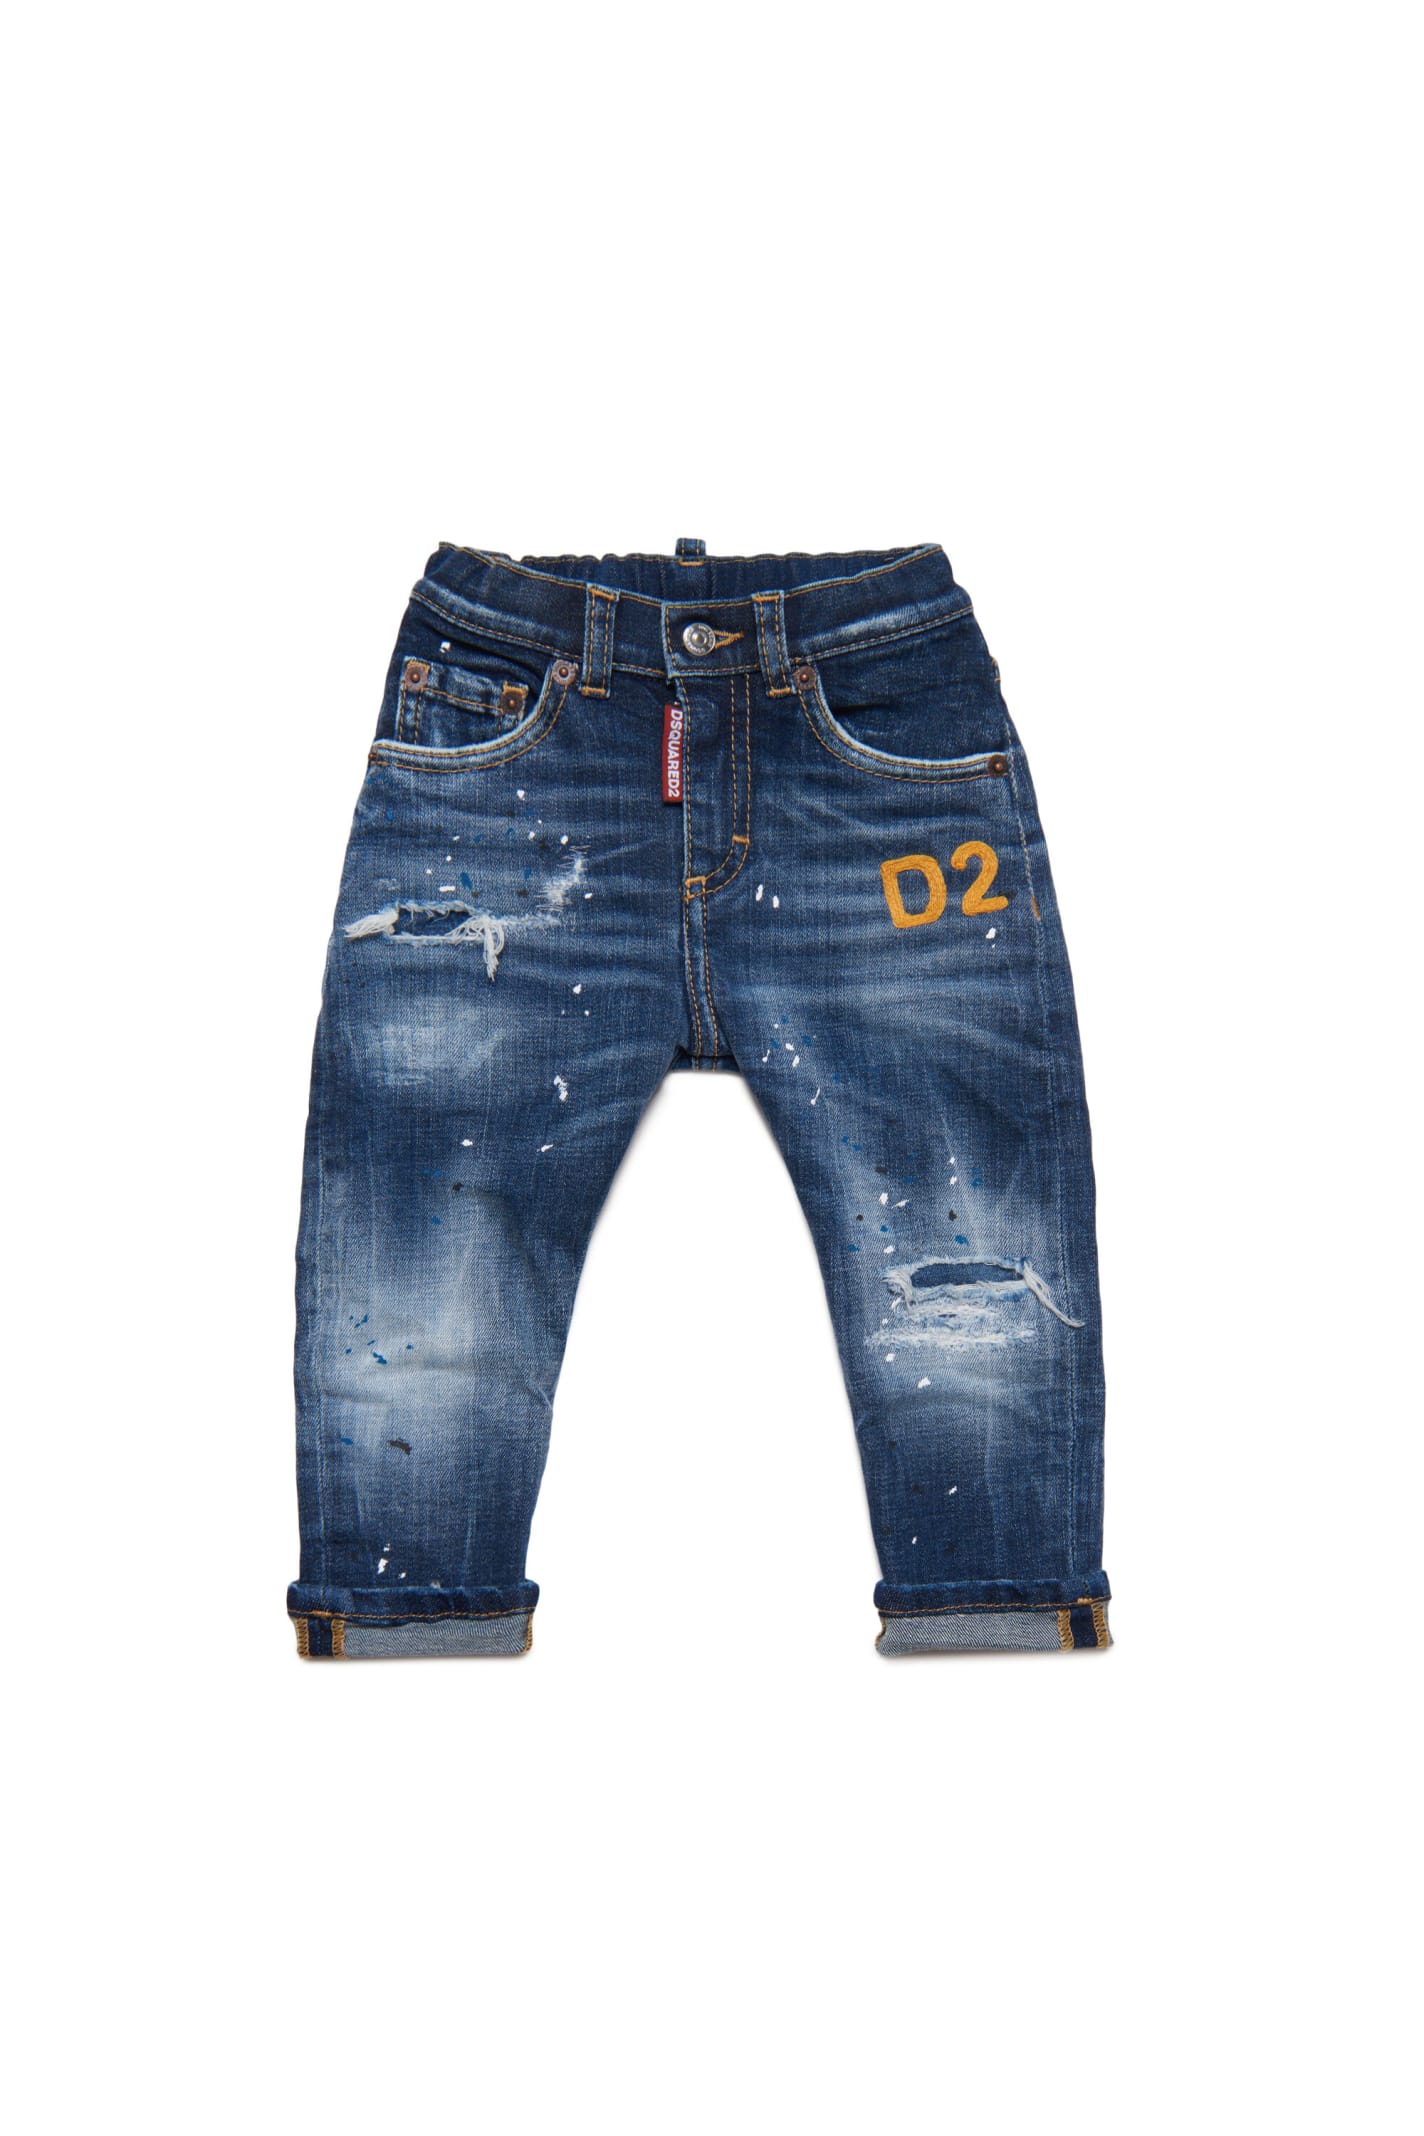 DSQUARED2 D2P76AB TROUSERS DSQUARED MEDIUM BLUE SHADED JEANS WITH BREAKS AND PATCHES